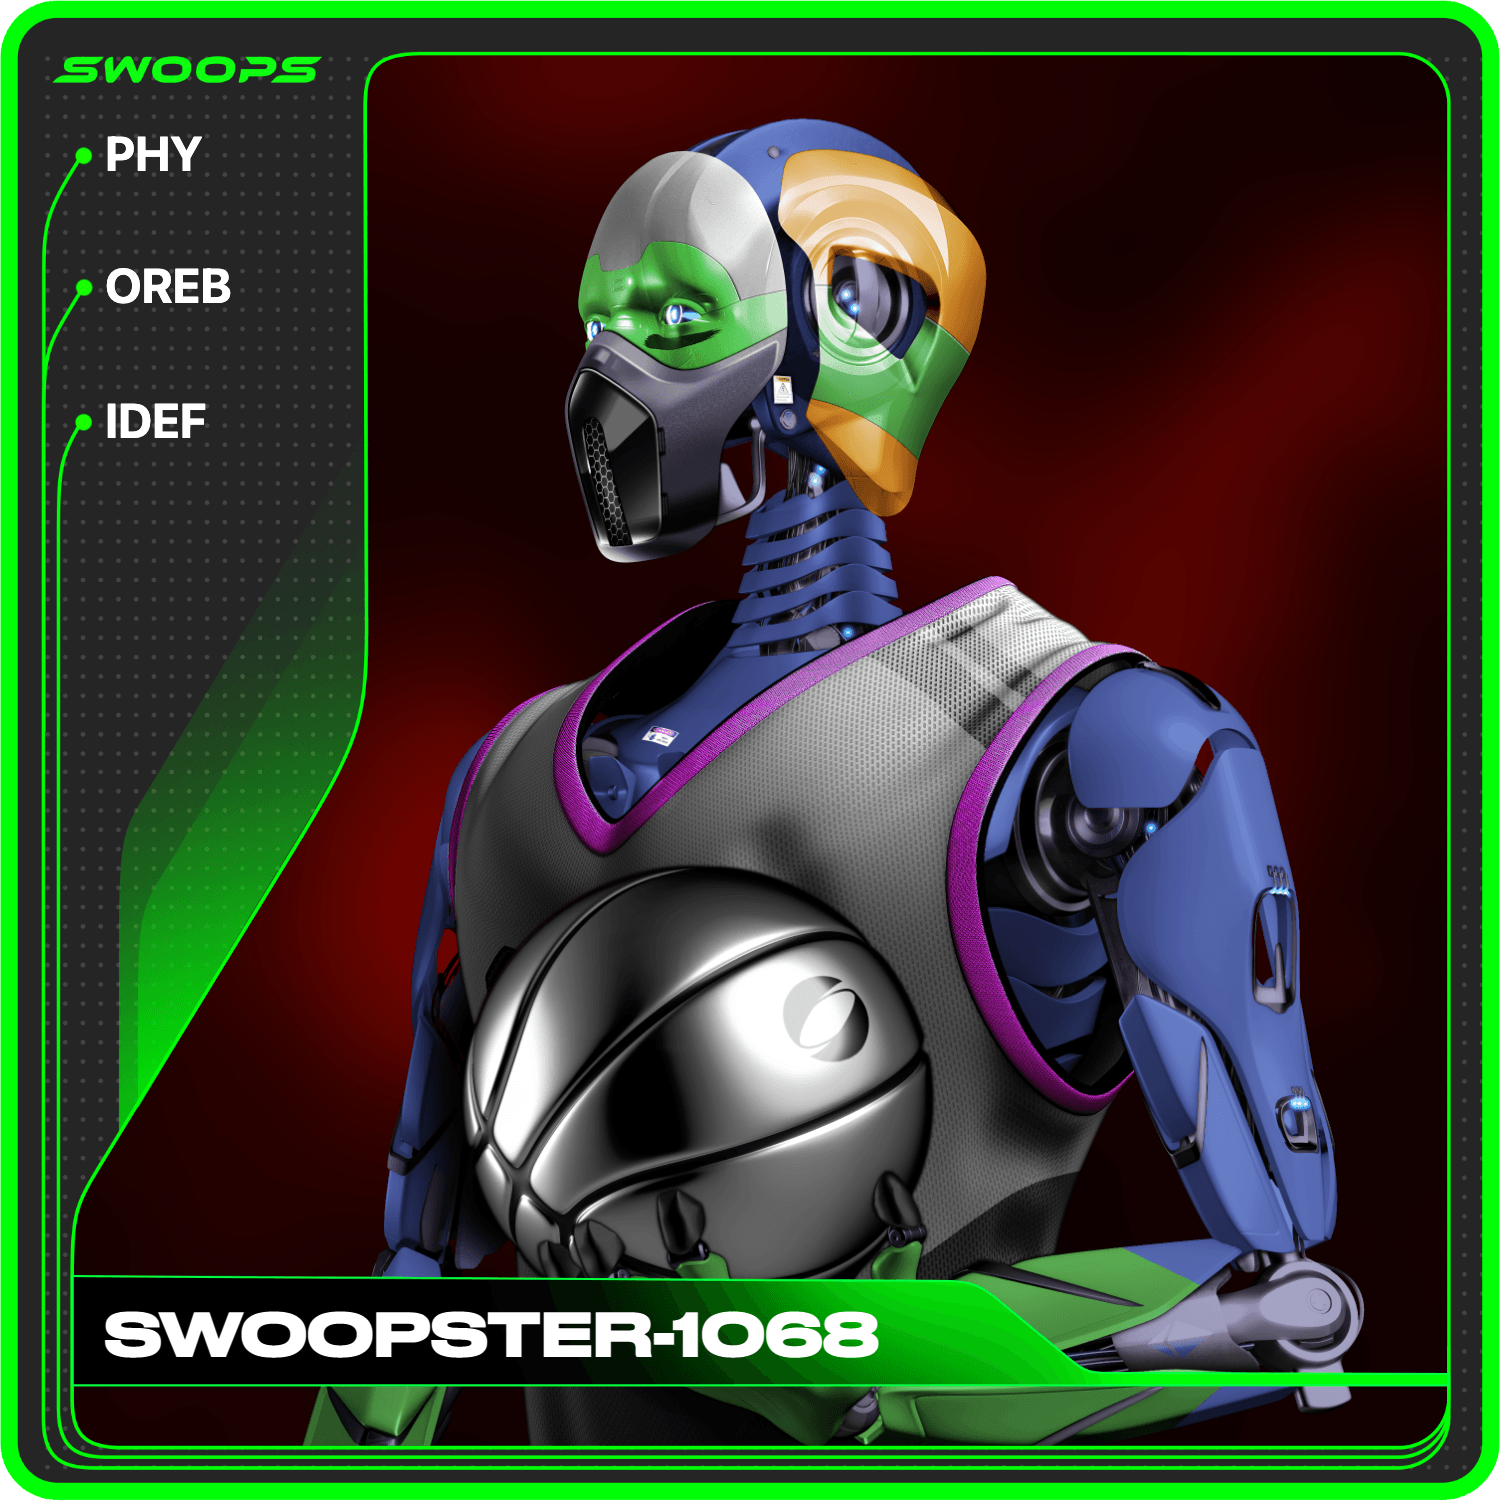 SWOOPSTER-1068